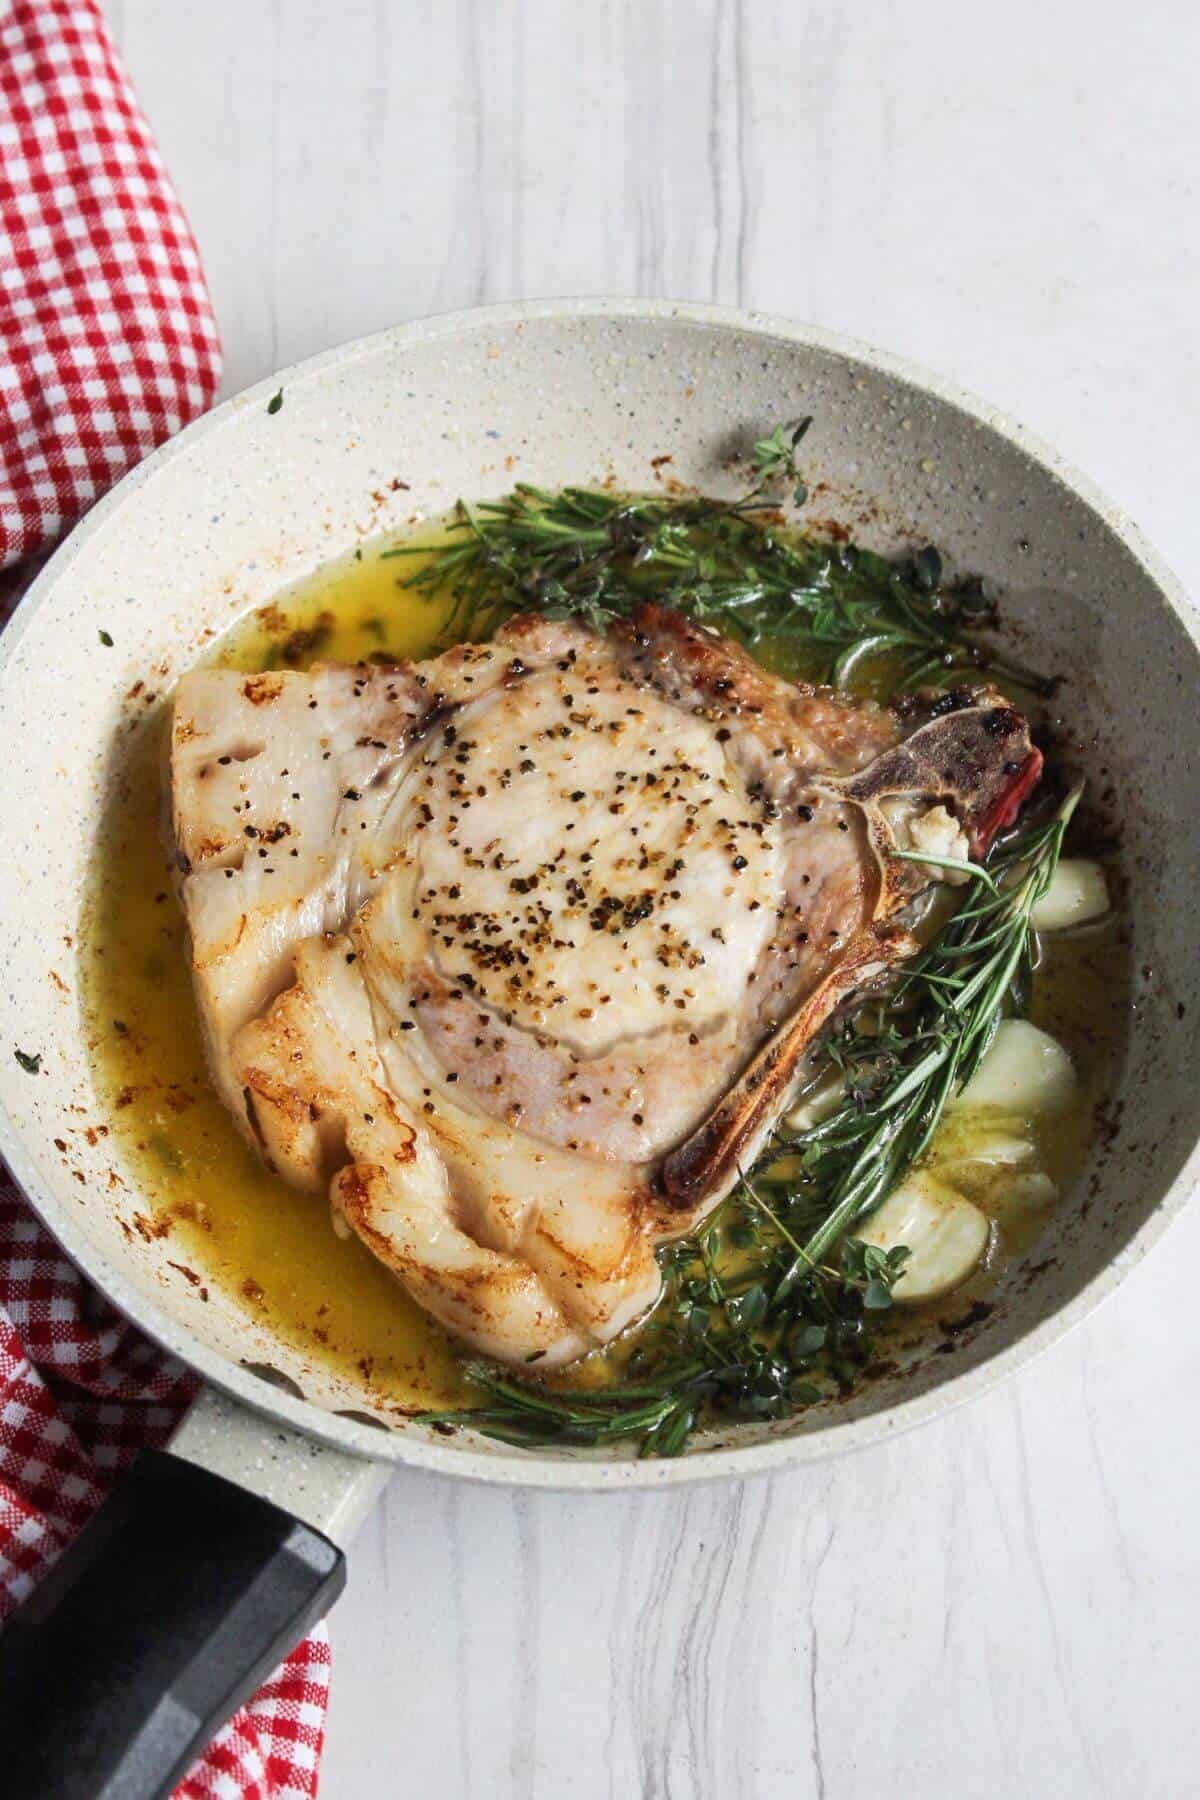 Pork chop in a pan with herbs and garlic.